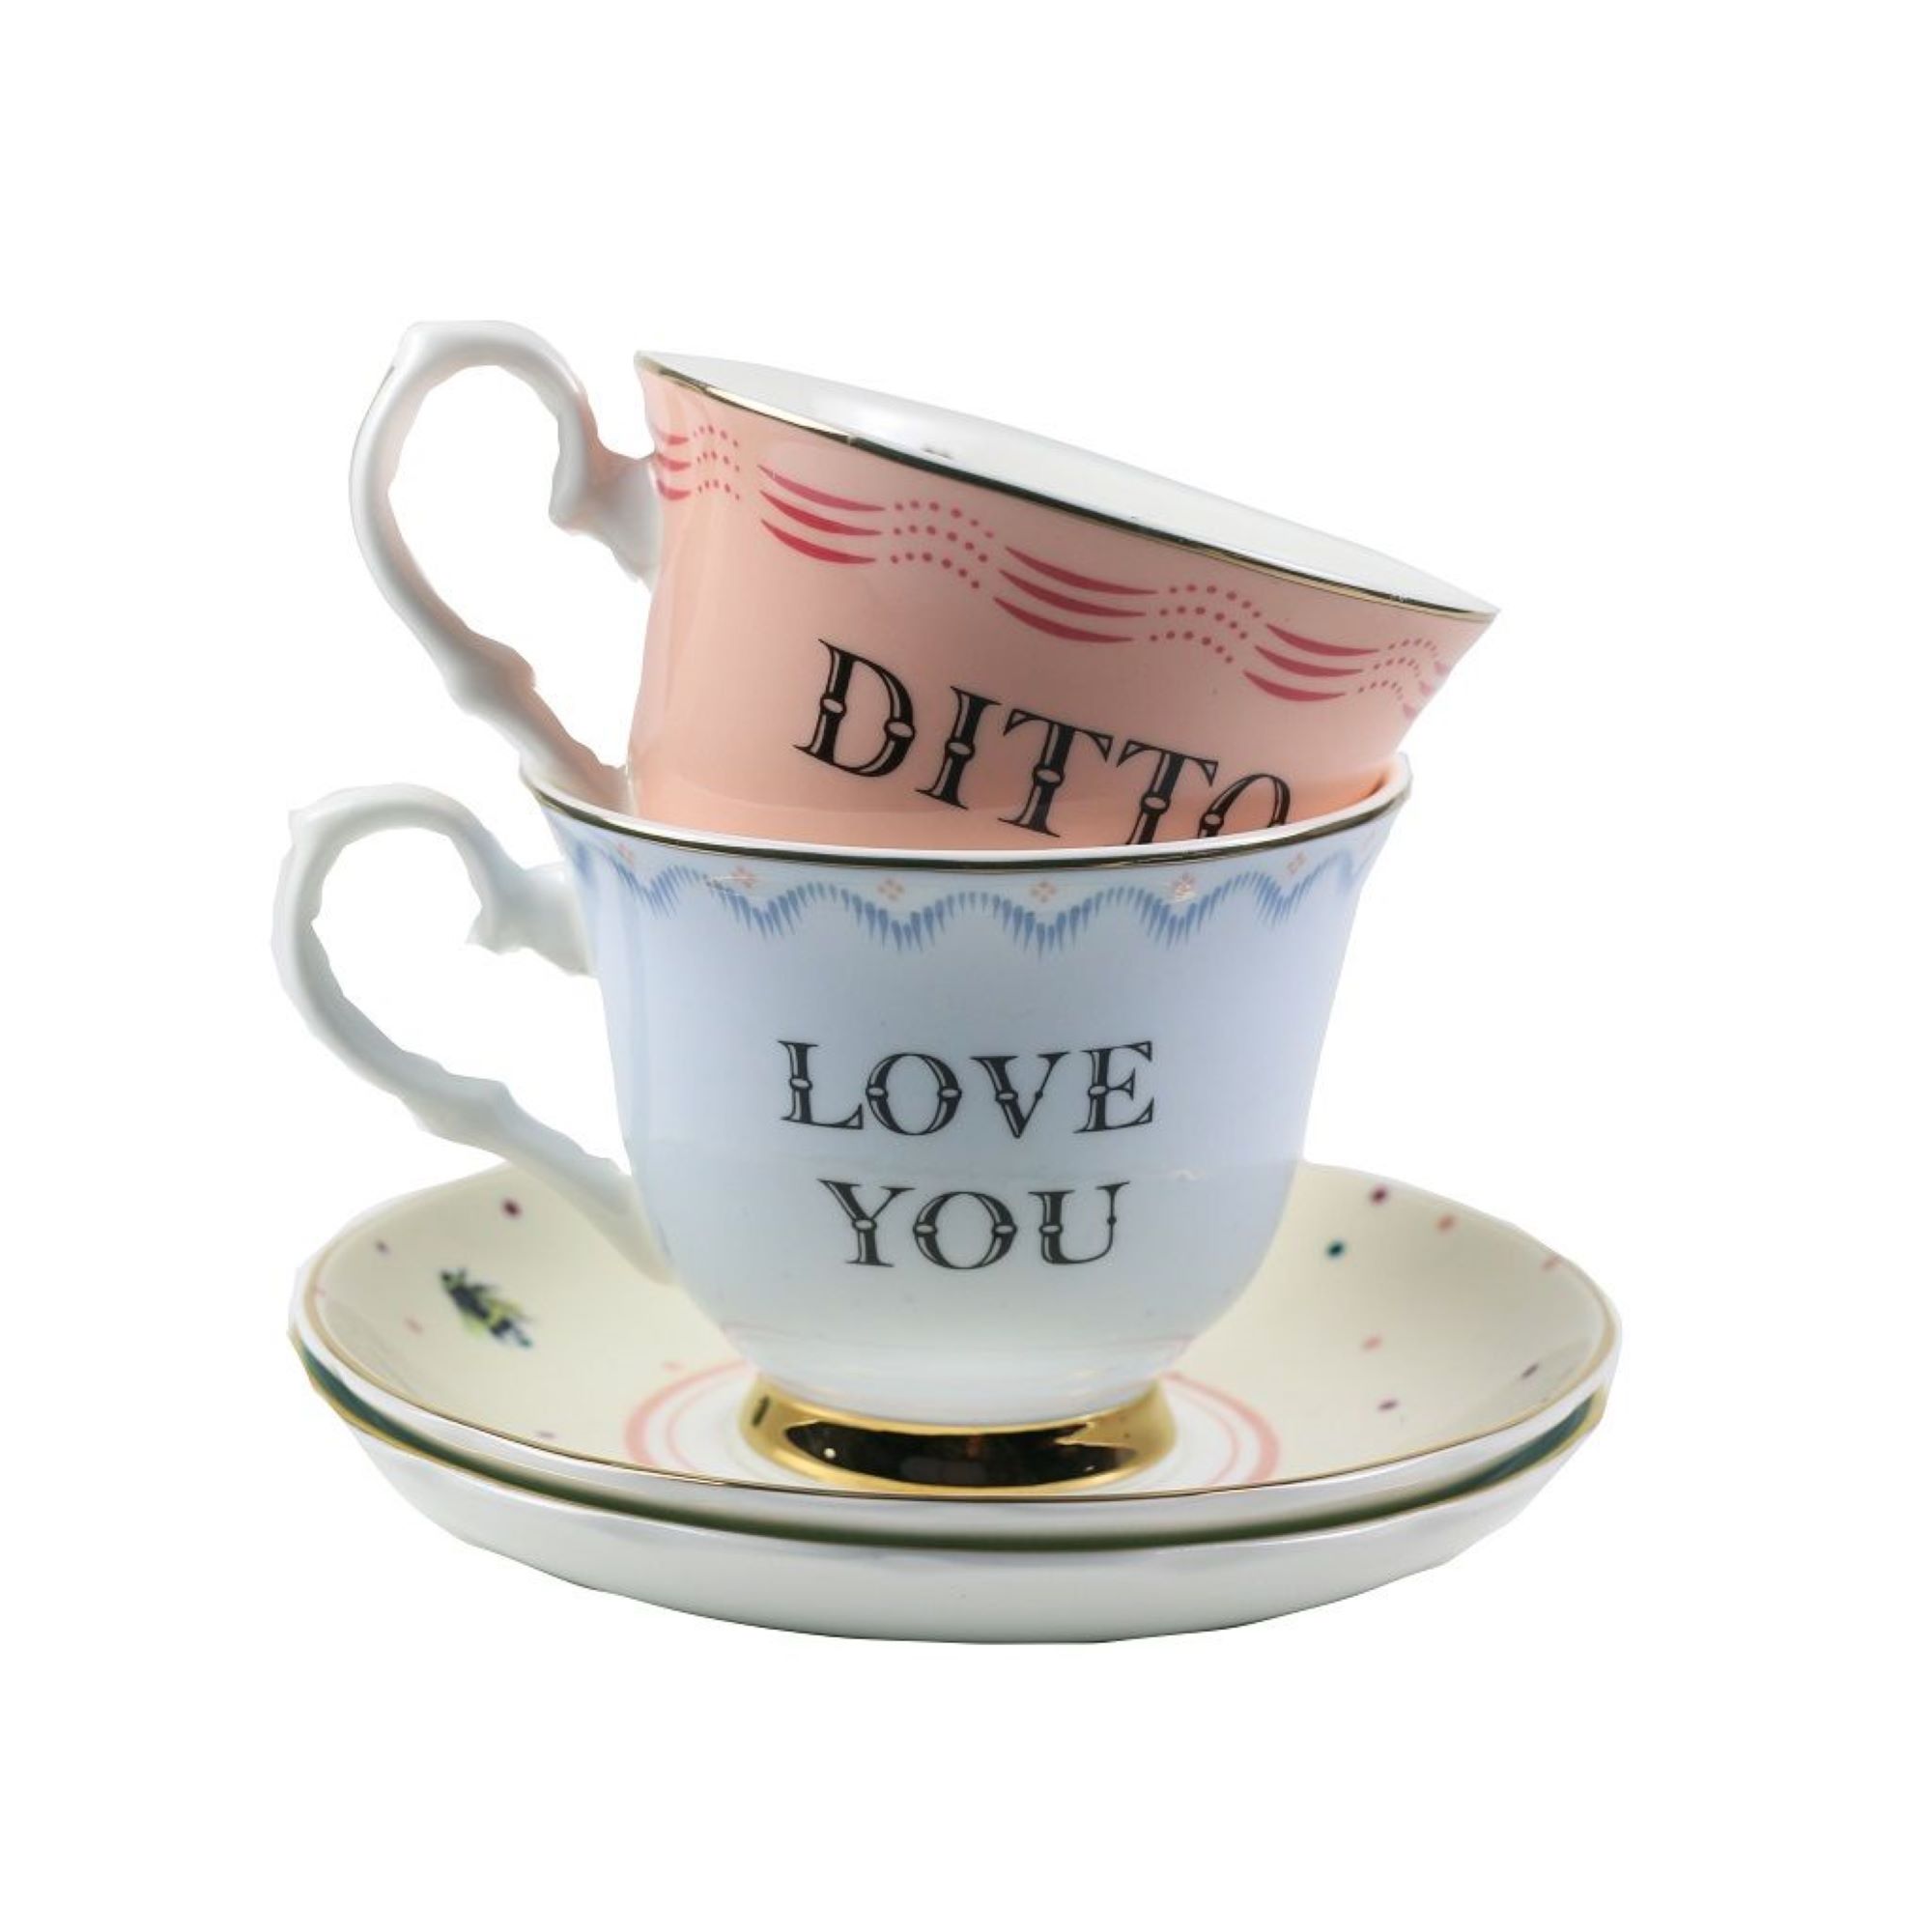 Yvonne Ellen 'Love You' and 'Ditto' Cup and Saucer Set